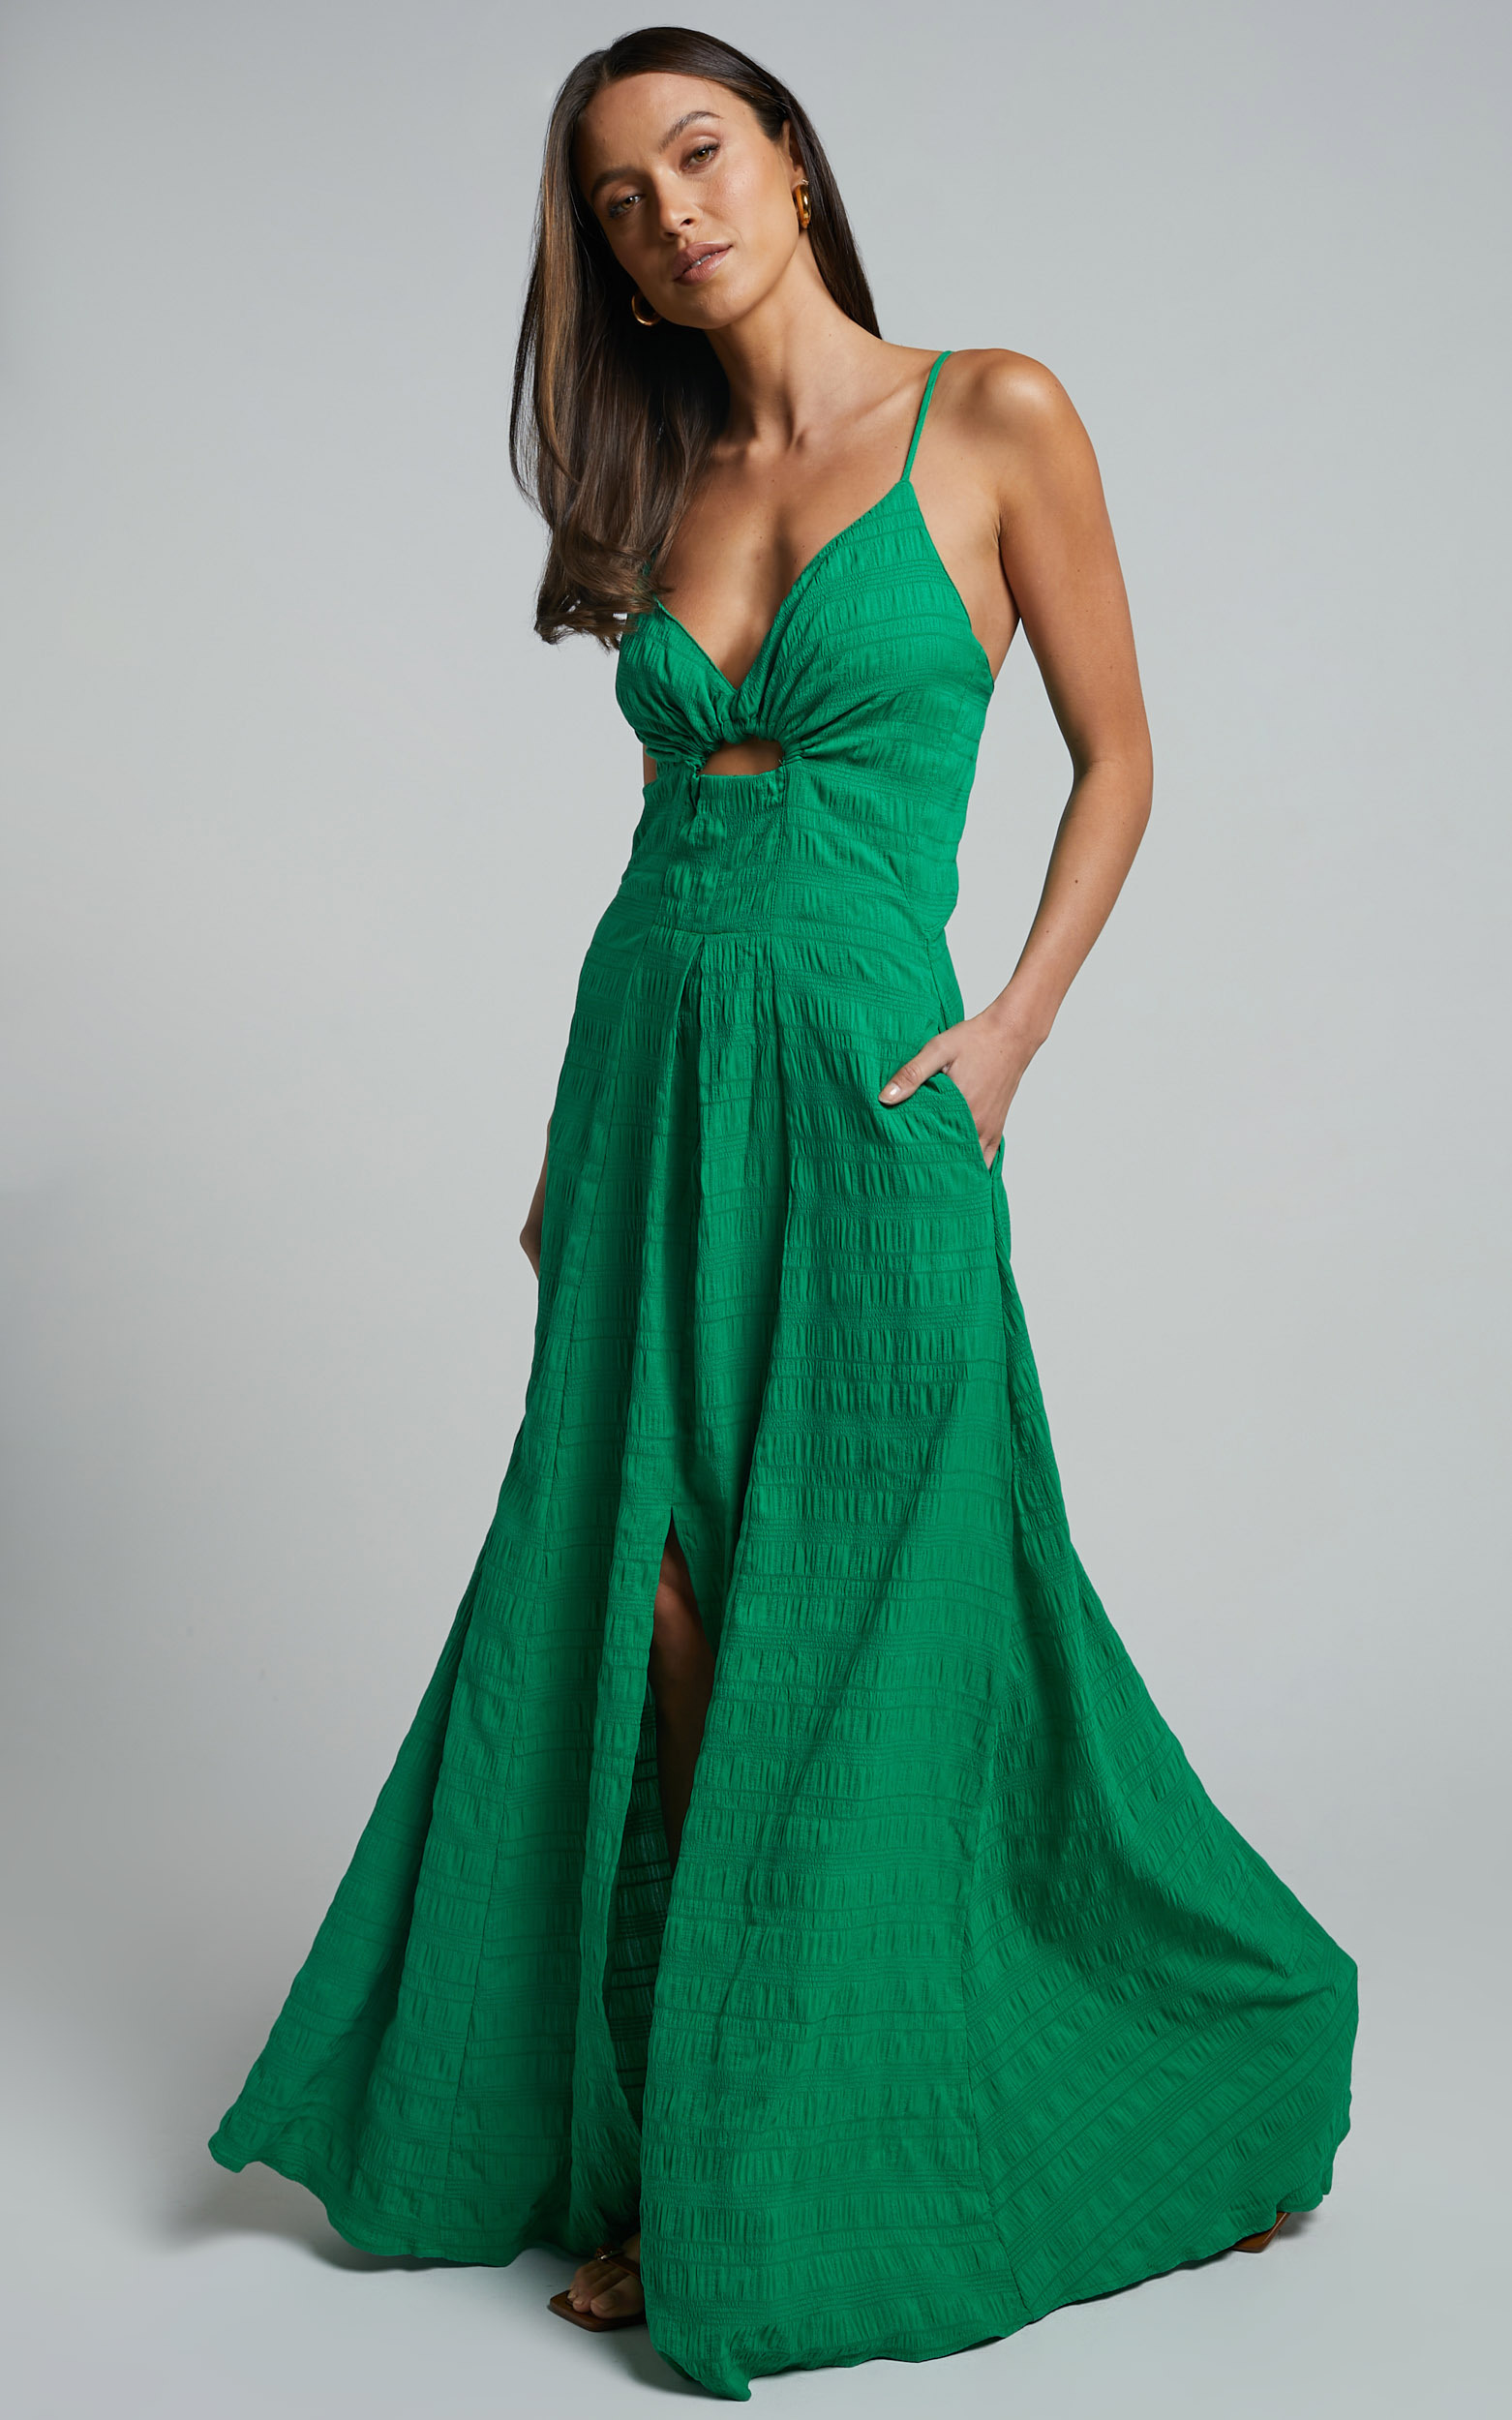 Marisse Maxi Dress - Cut Out Front Split Cross Back Textured Dress in Green - 06, GRN1, hi-res image number null